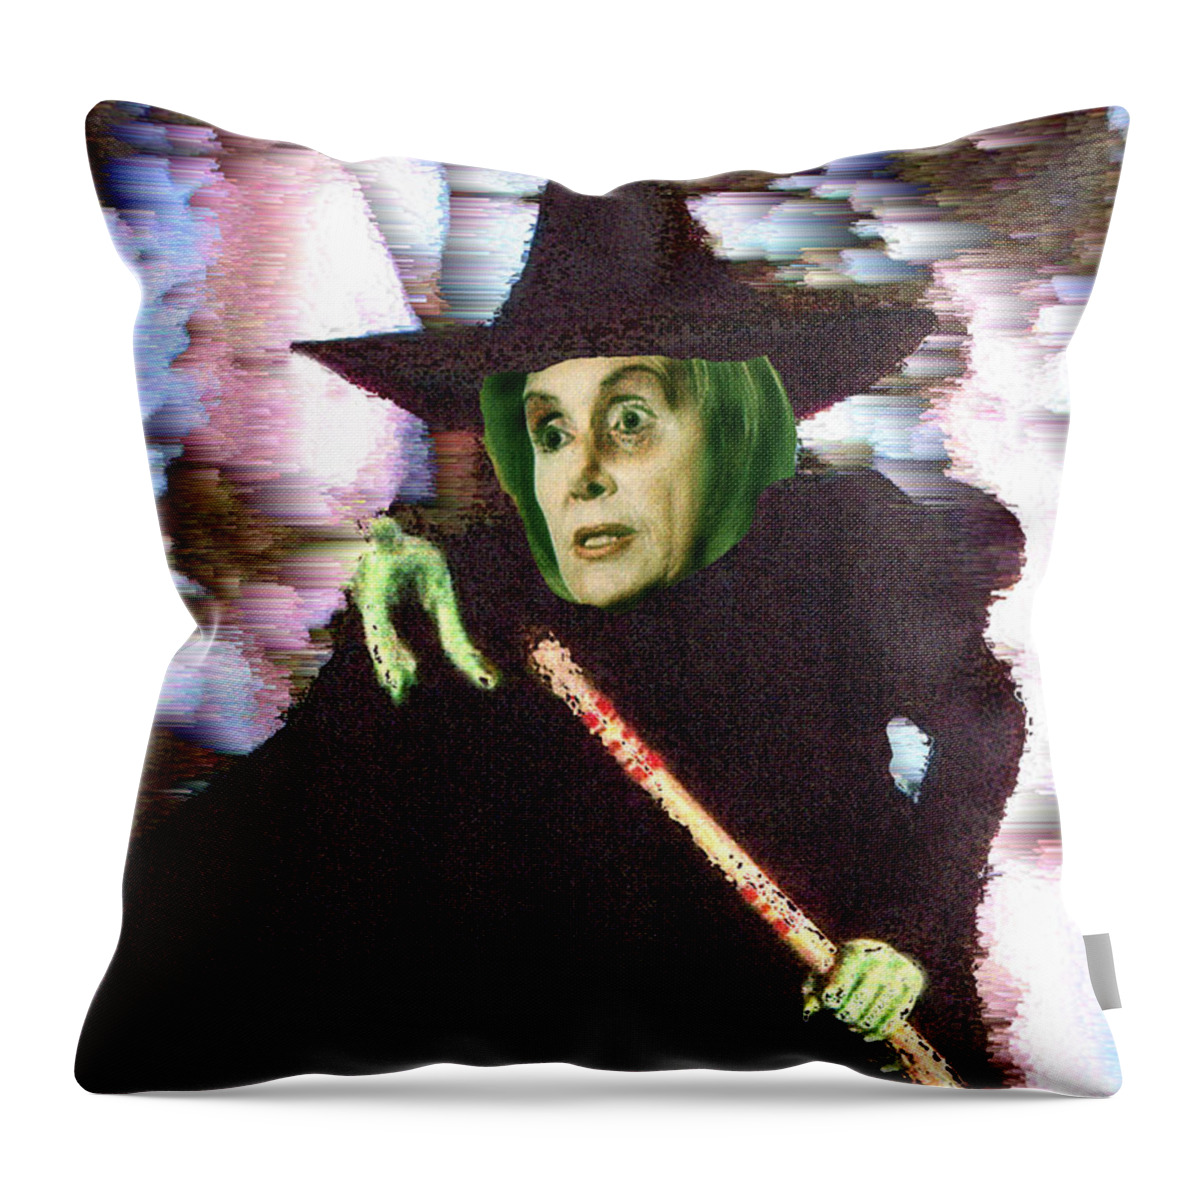 Wizard Of Oz Throw Pillow featuring the digital art The New Wicked Witch of the West by Seth Weaver